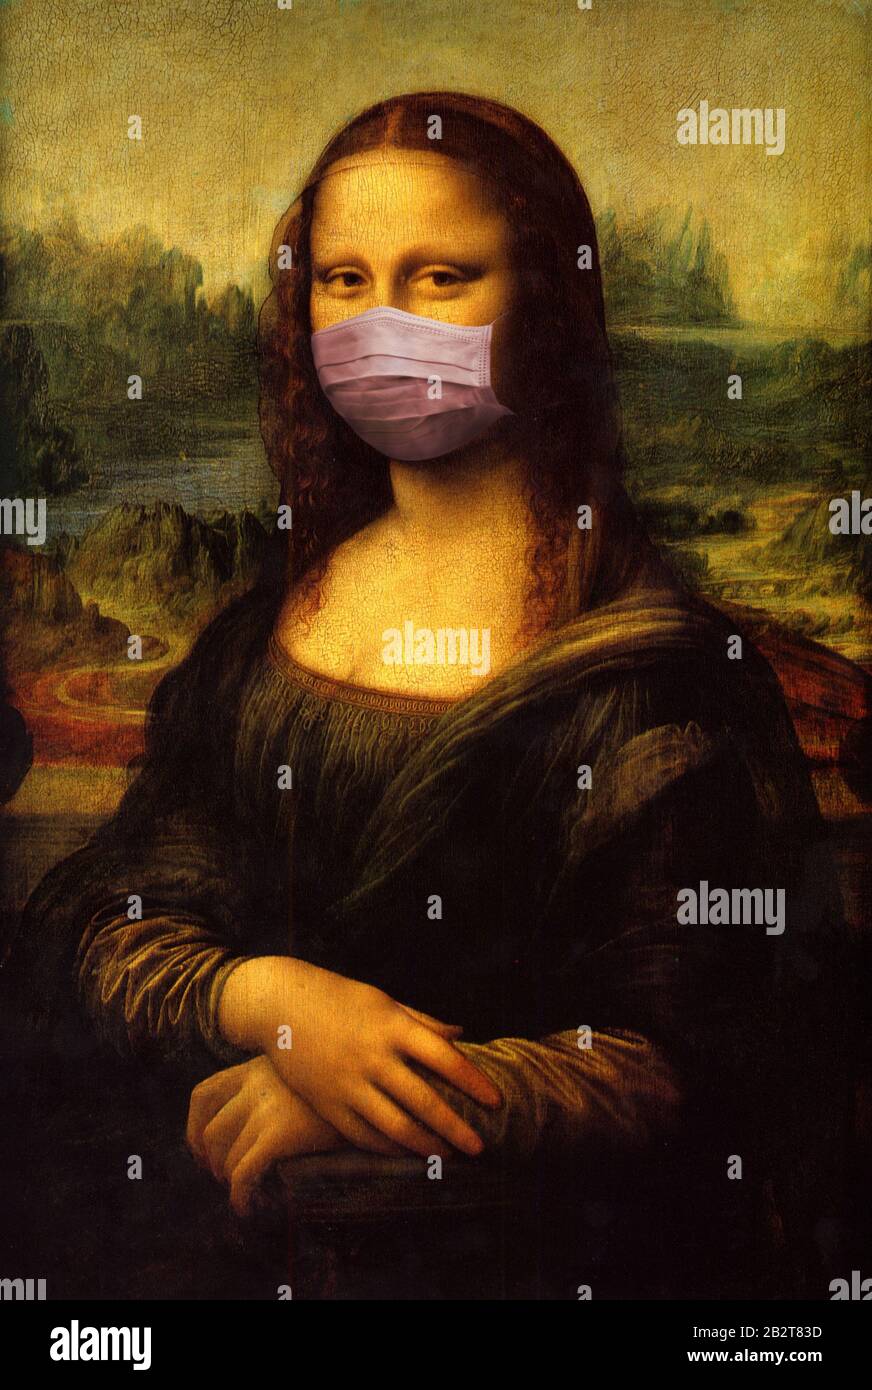 Famous painting with a face mask. Digital montage. Concept for coronavirus outbreak in Italy. Stock Photo